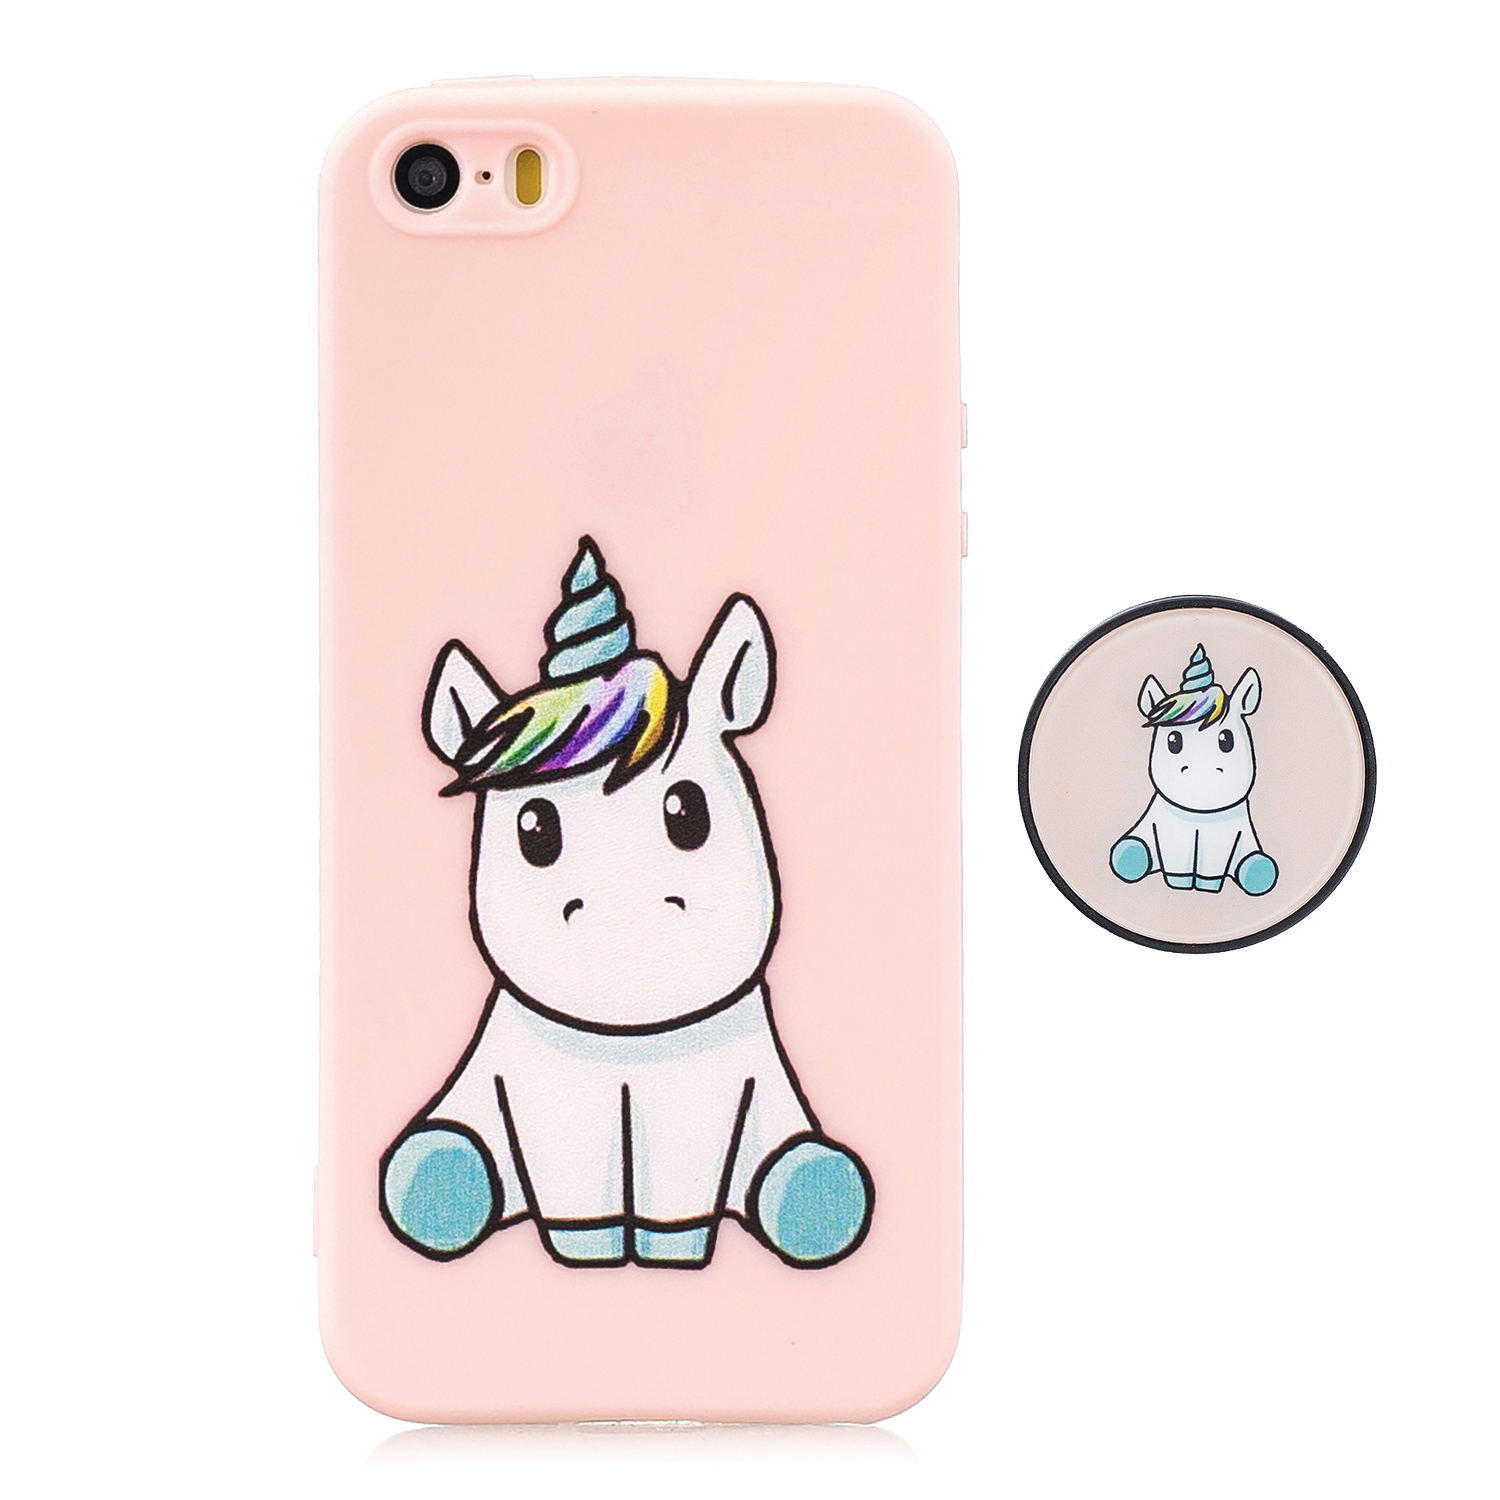 Wholesale For Iphone 5 5s Se Phone Cases Tpu Full Cover Cute Cartoon Painted Case Girls Mobile Phone Cover 6 From China